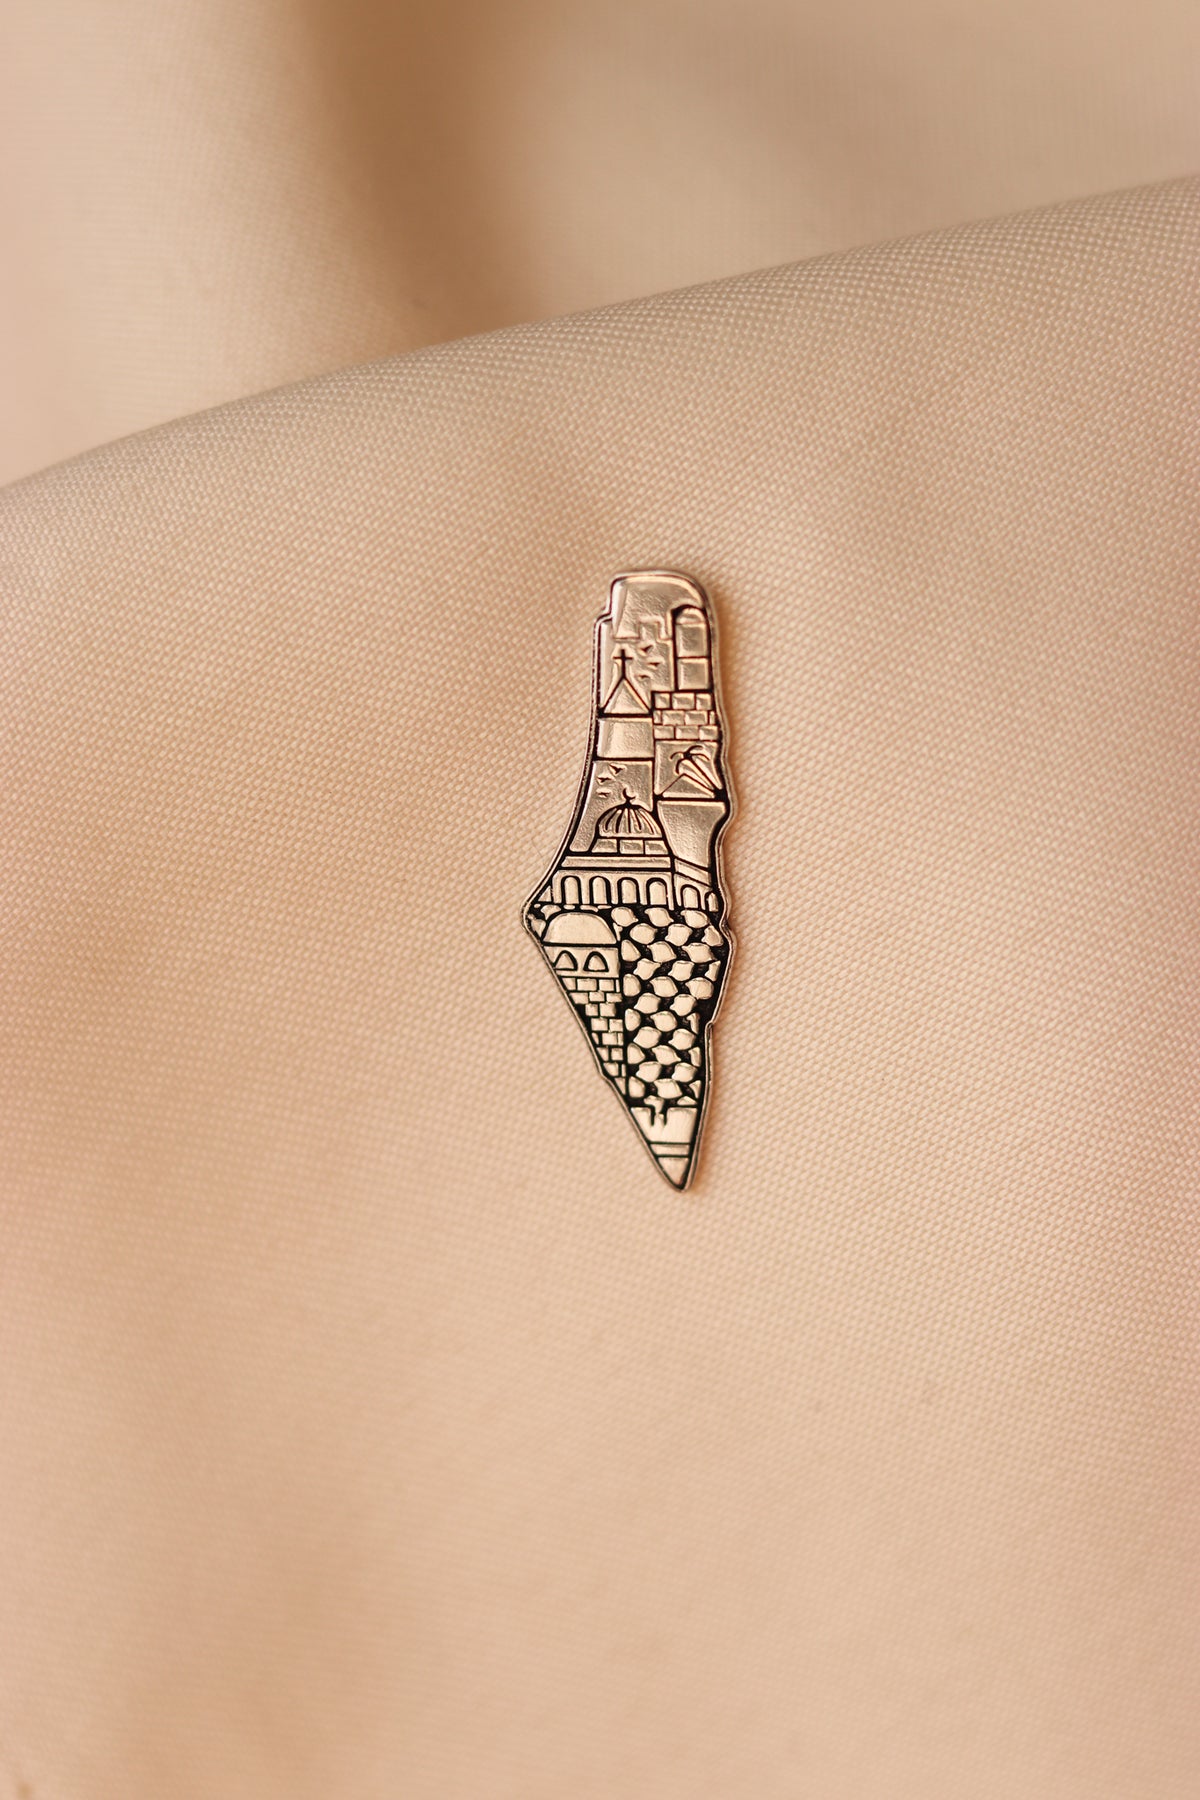 Palestine map with old city and Hatta pattern engraved inside pin